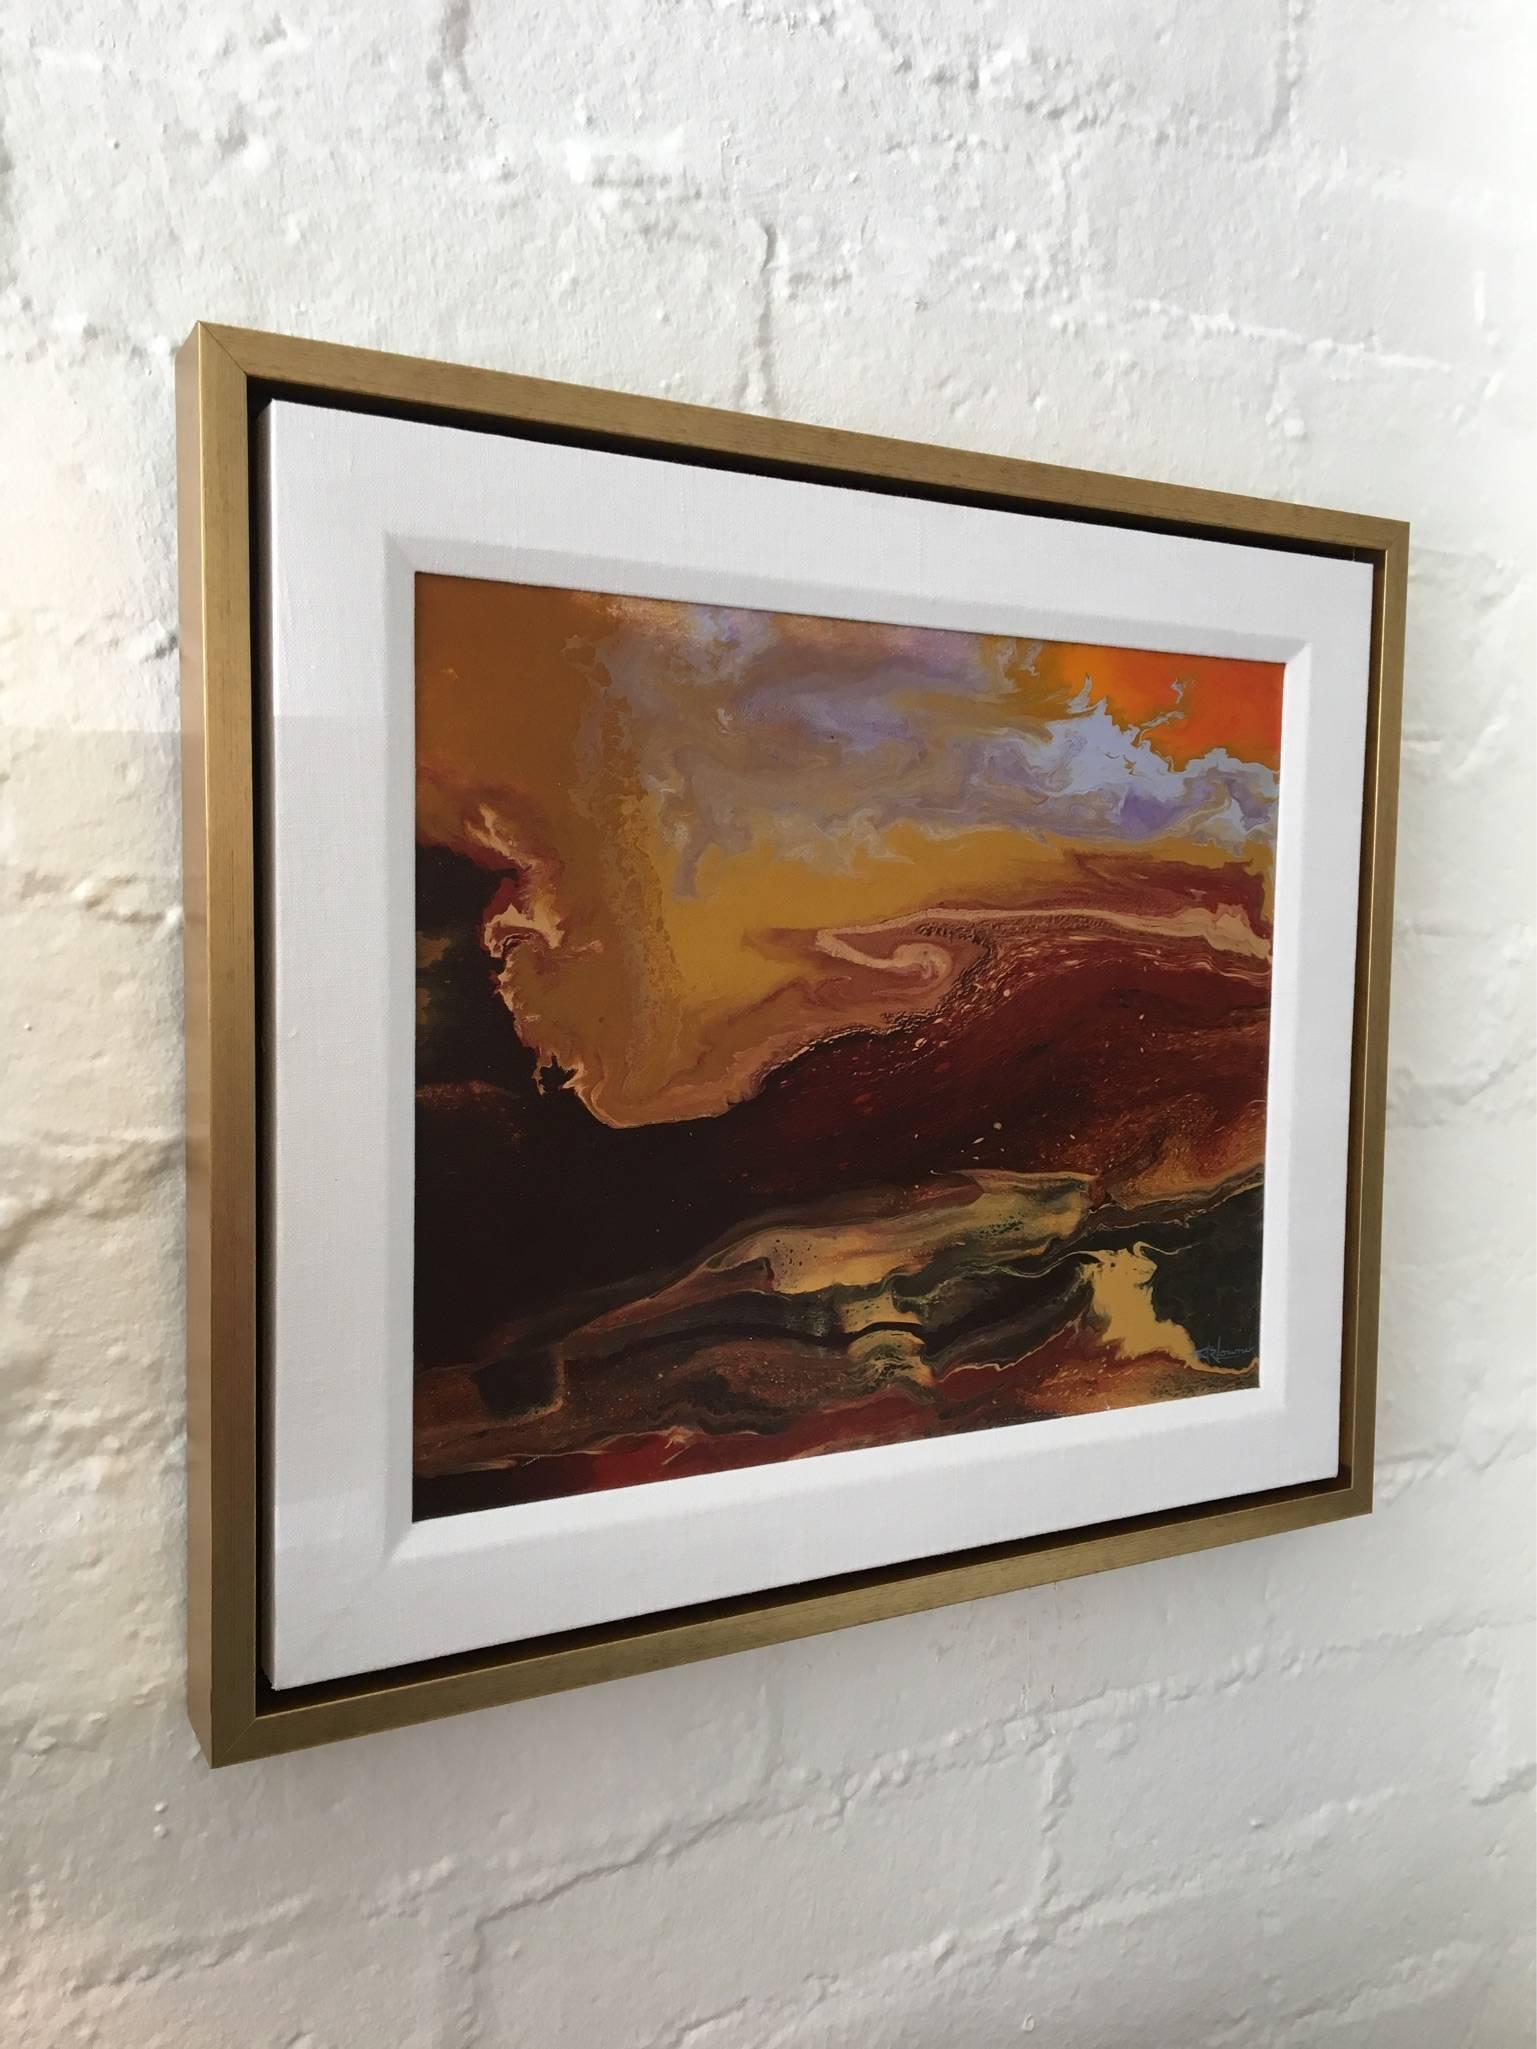 A beautiful 1970s acrylic on canvas abstract painting by American listed artist Ted Lownik. Newly framed with a wood gilded frame. Signed on the right lower corner.
Dimension: 23.5